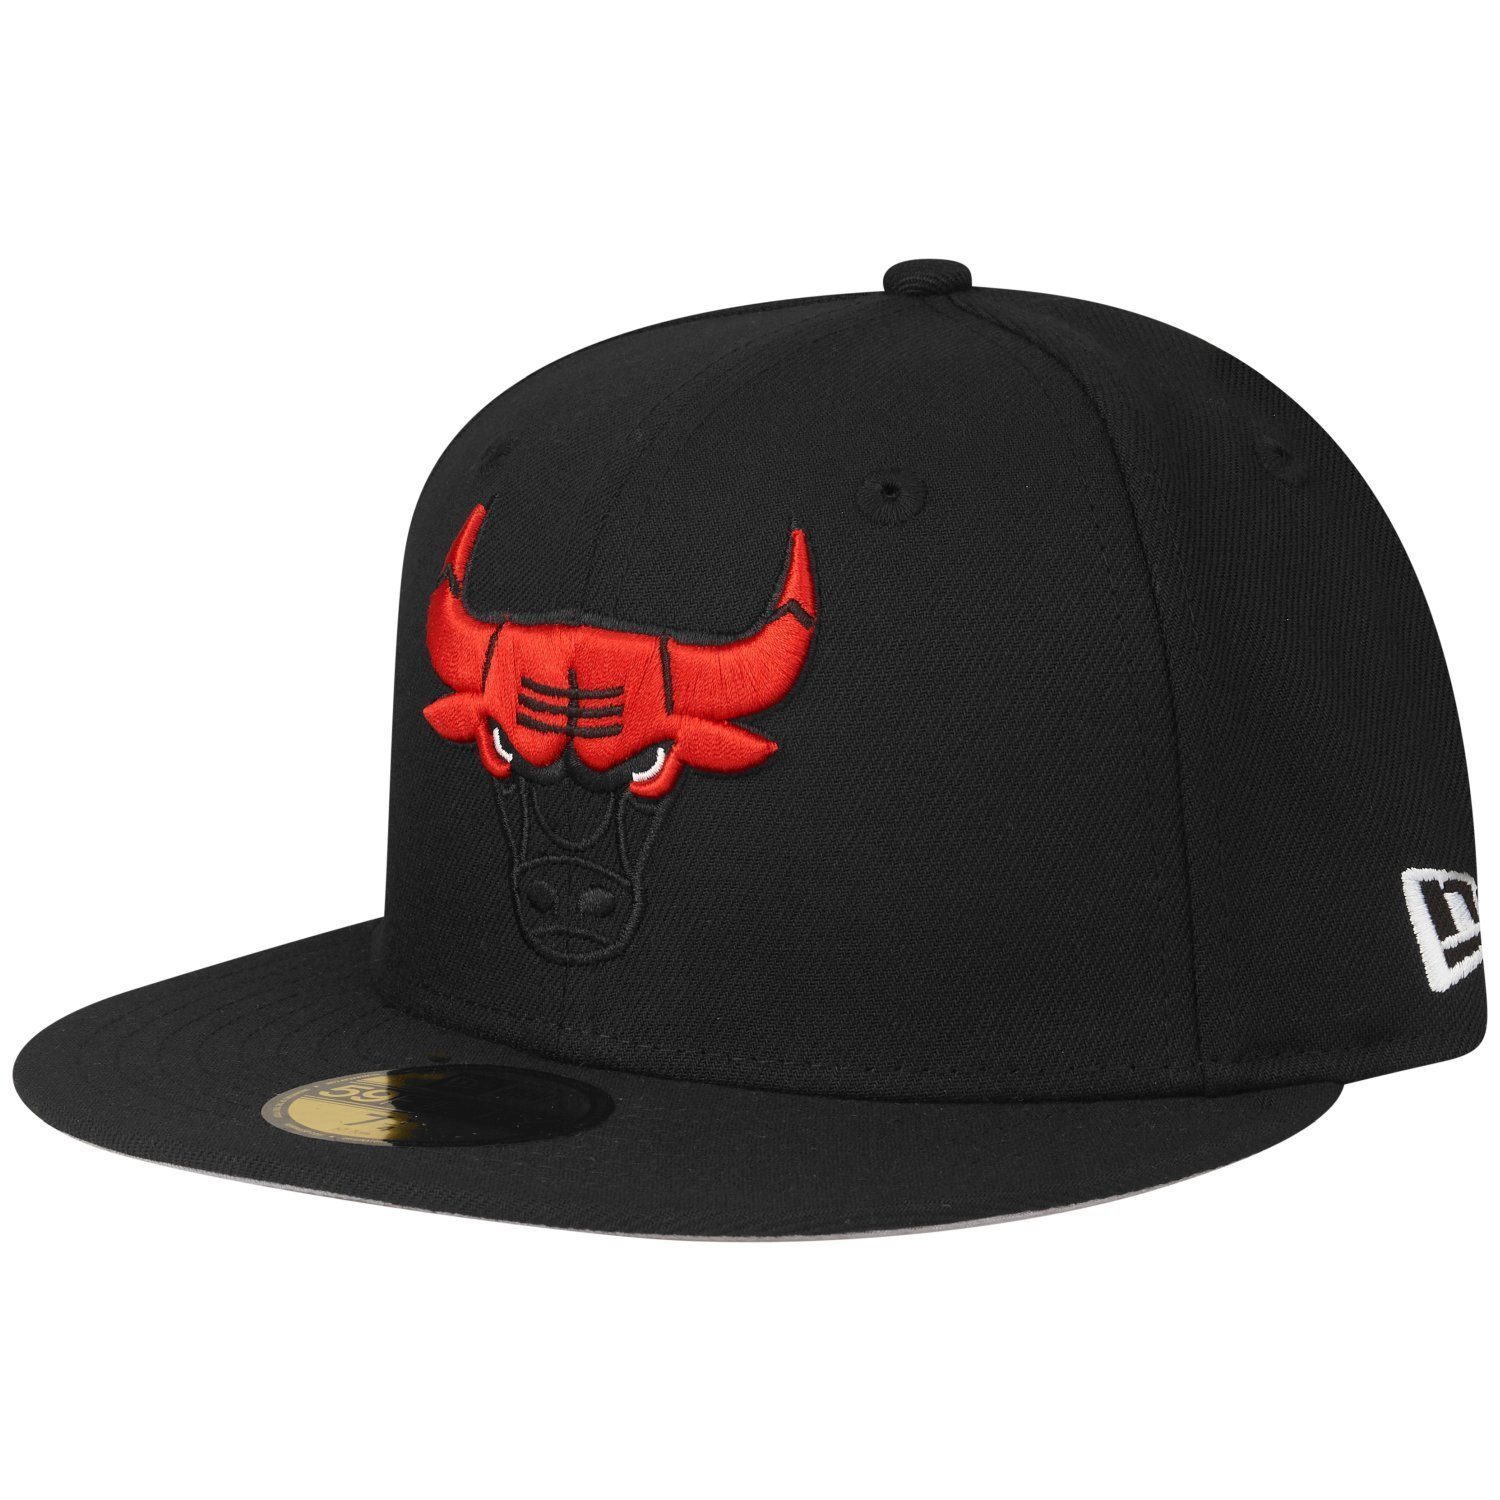 Chicago Era 59Fifty NBA Fitted Cap Teams New Sidepatch Bulls